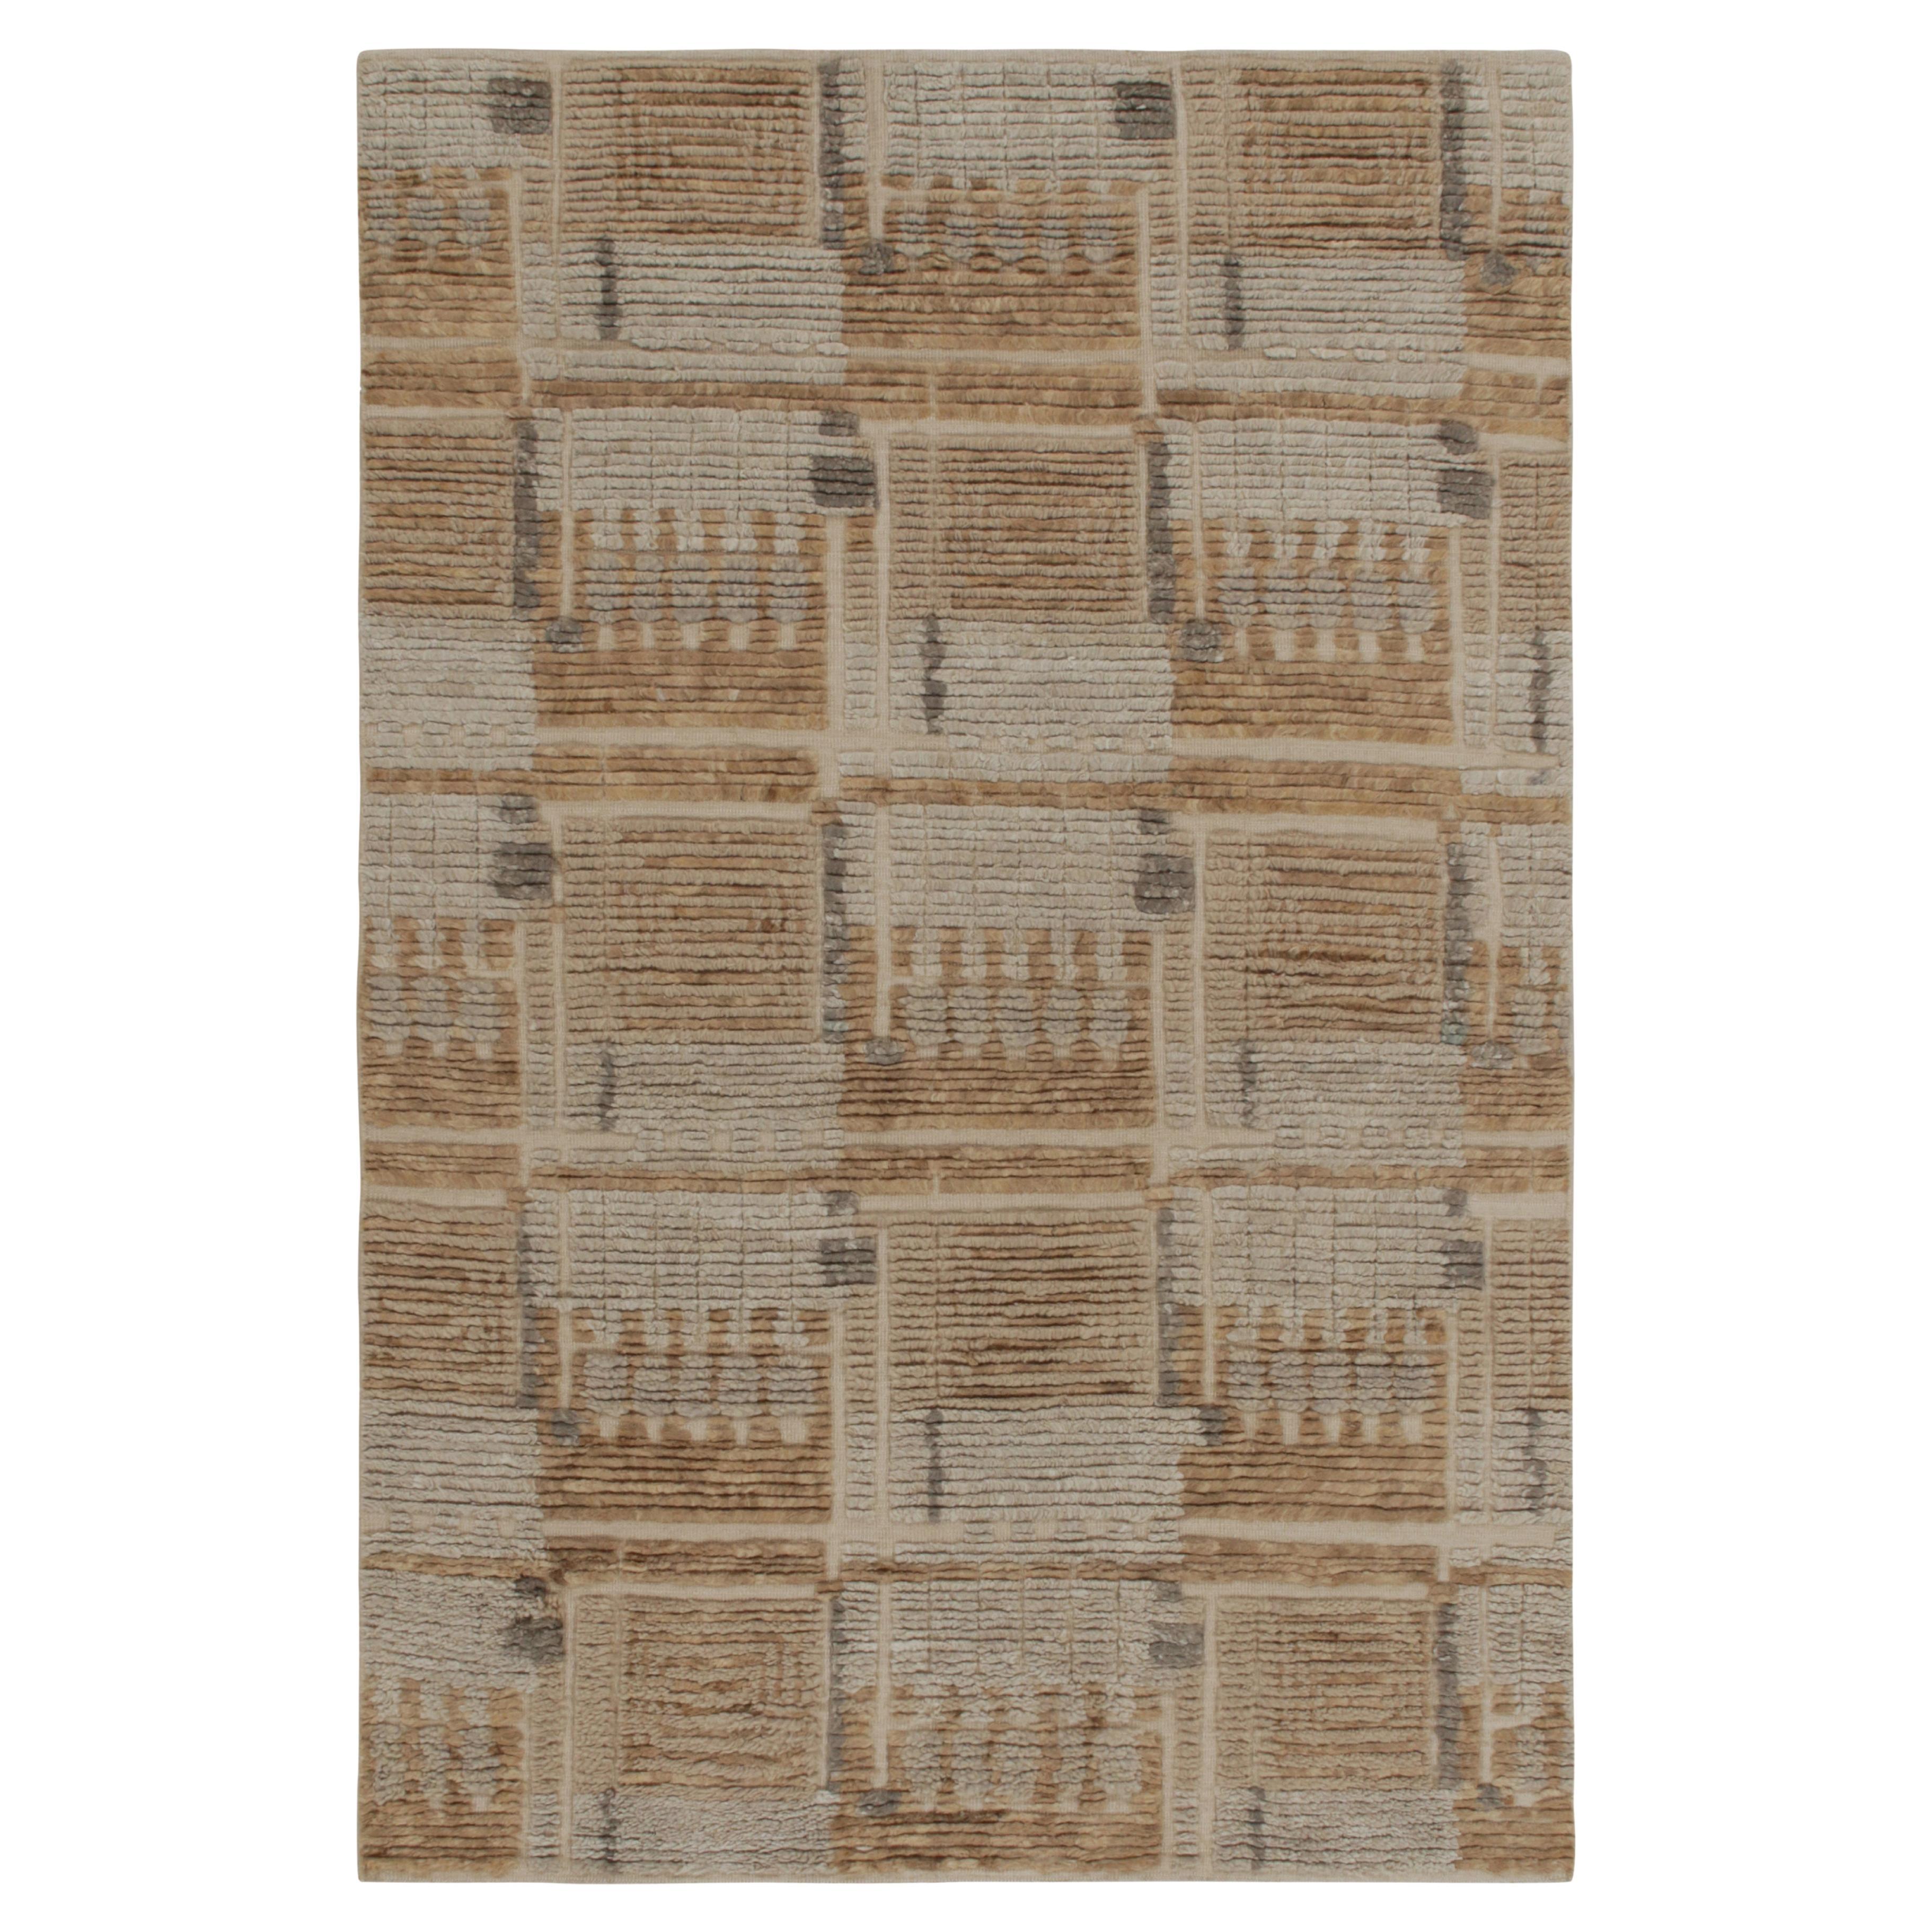 Rug & Kilim’s Scandinavian Style Rug in Beige-Brown and Gray High-Low Patterns